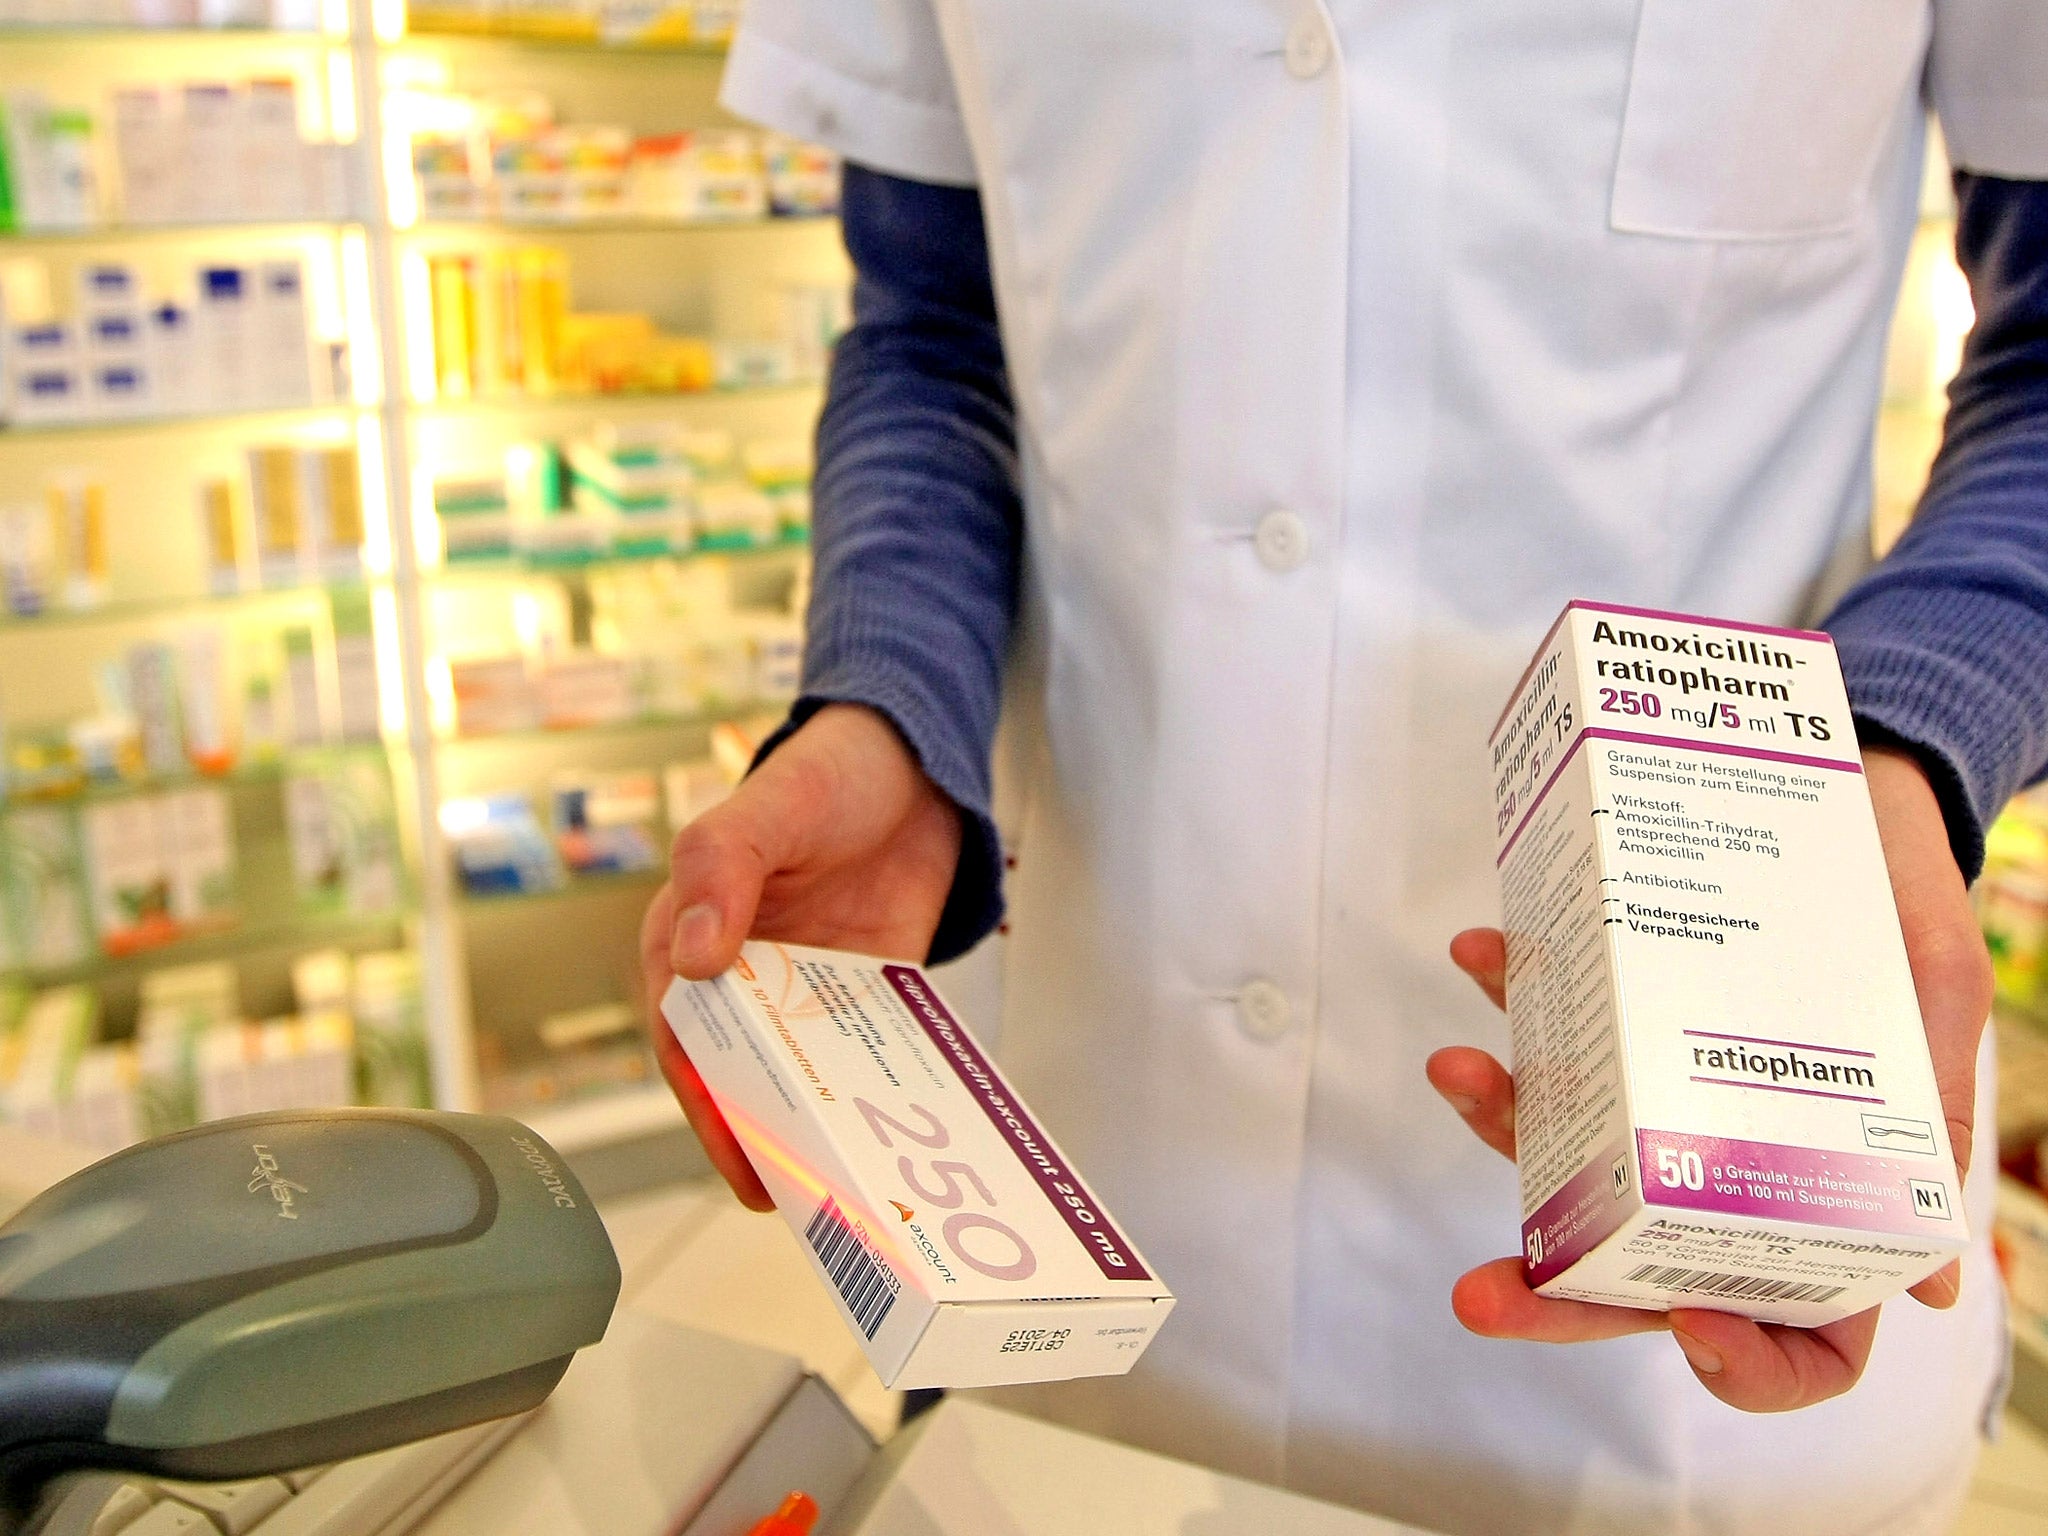 Antibiotics are prescribed by GPs too freely, says a medical standards body